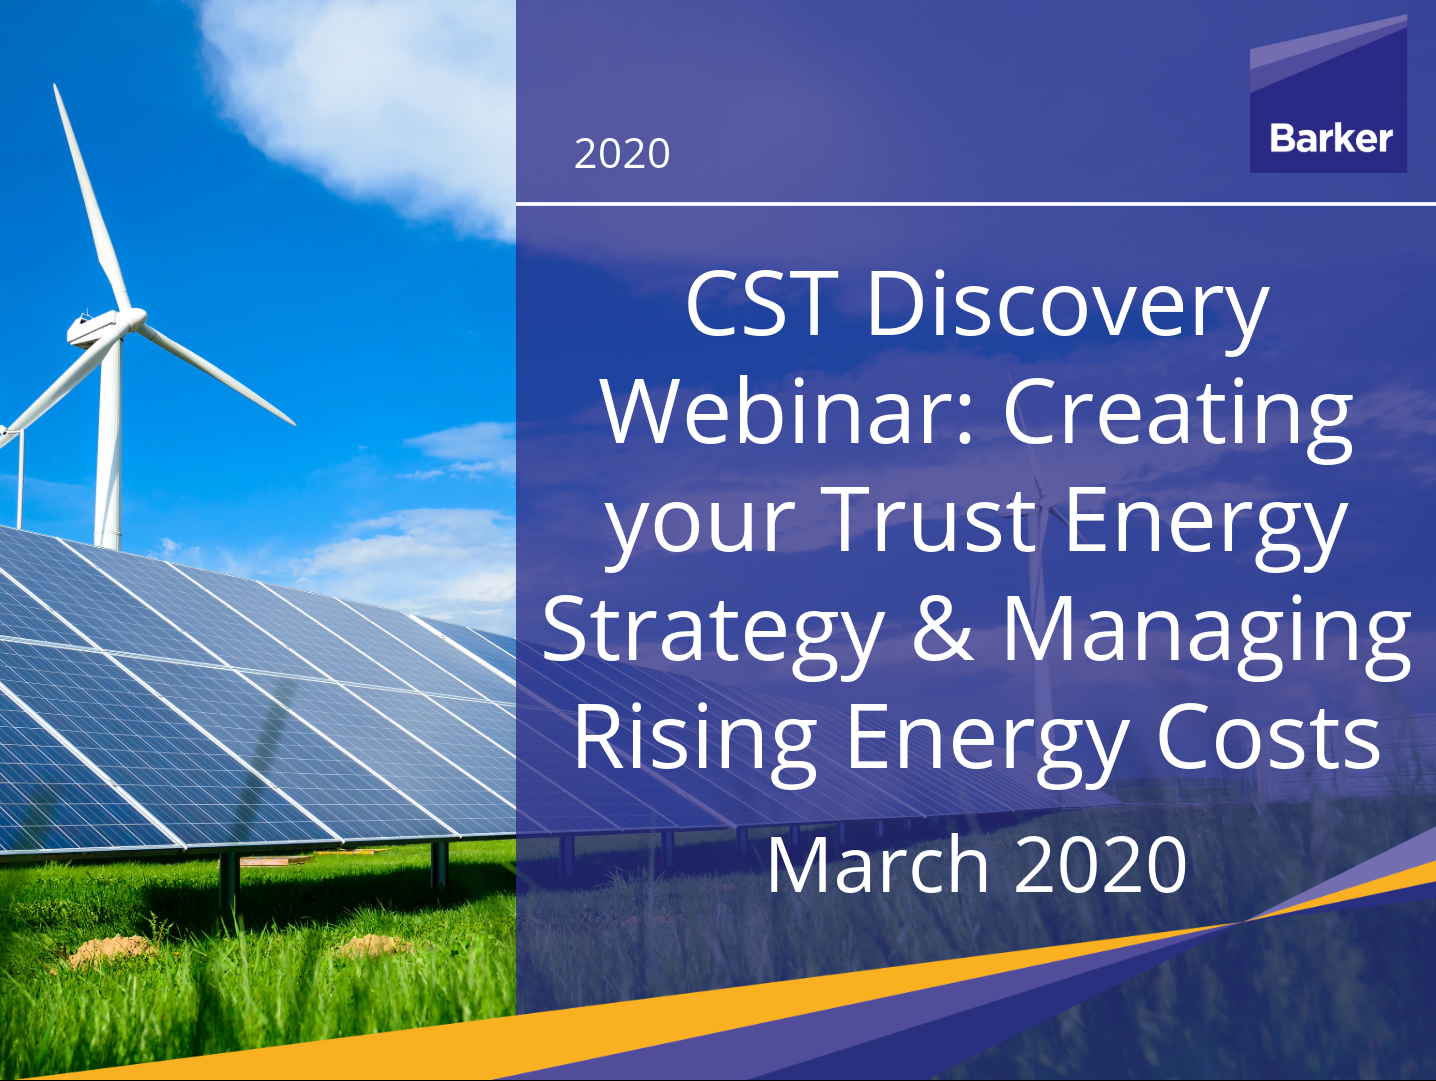 CST Discovery Webinar: Creating Your Trust Energy Strategy & Managing Rising Energy Costs